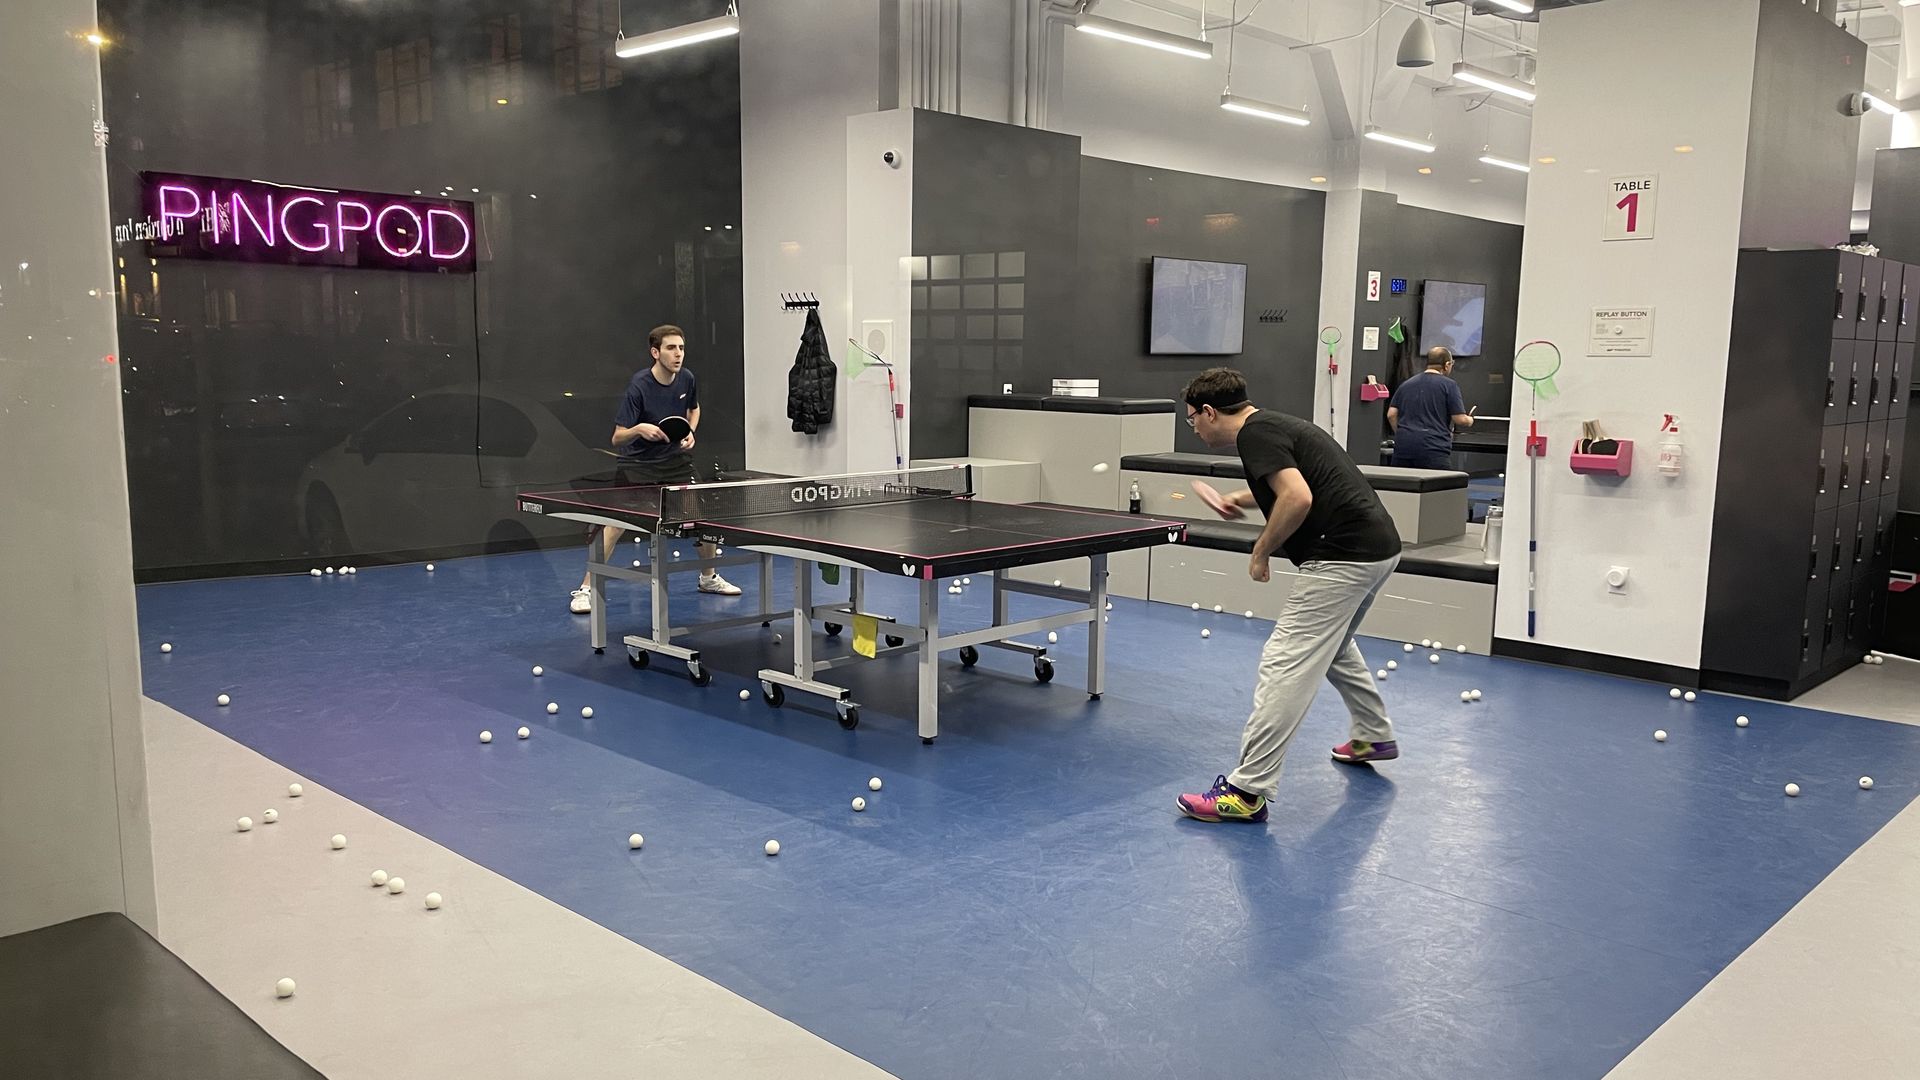 Two men playing ping-pond at an indoor studio called Pingpod.